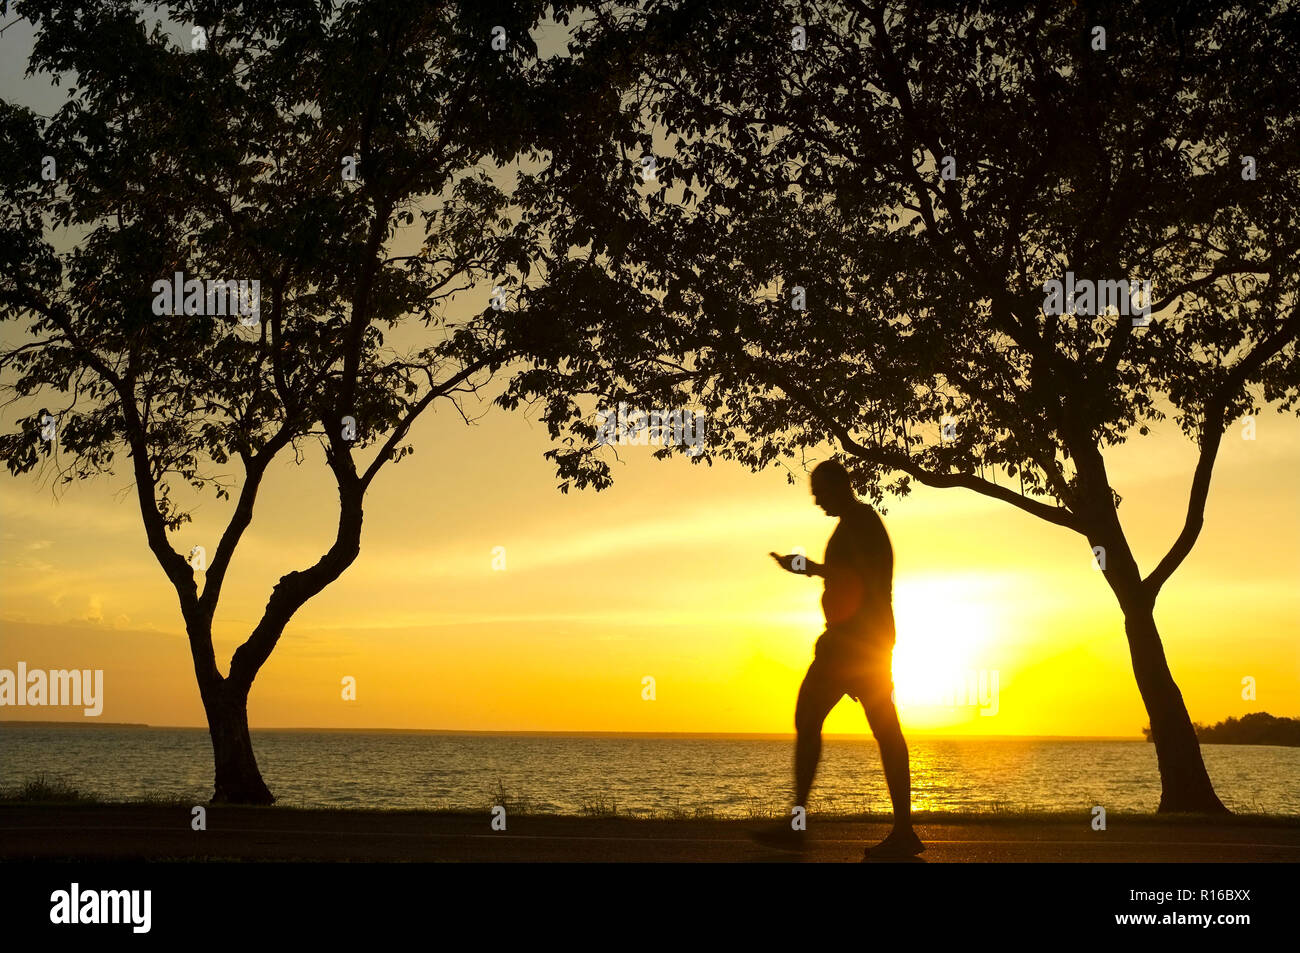 Silhouette of trees and a man walking while looking at his mobile phone, against a beach sunset . Stock Photo